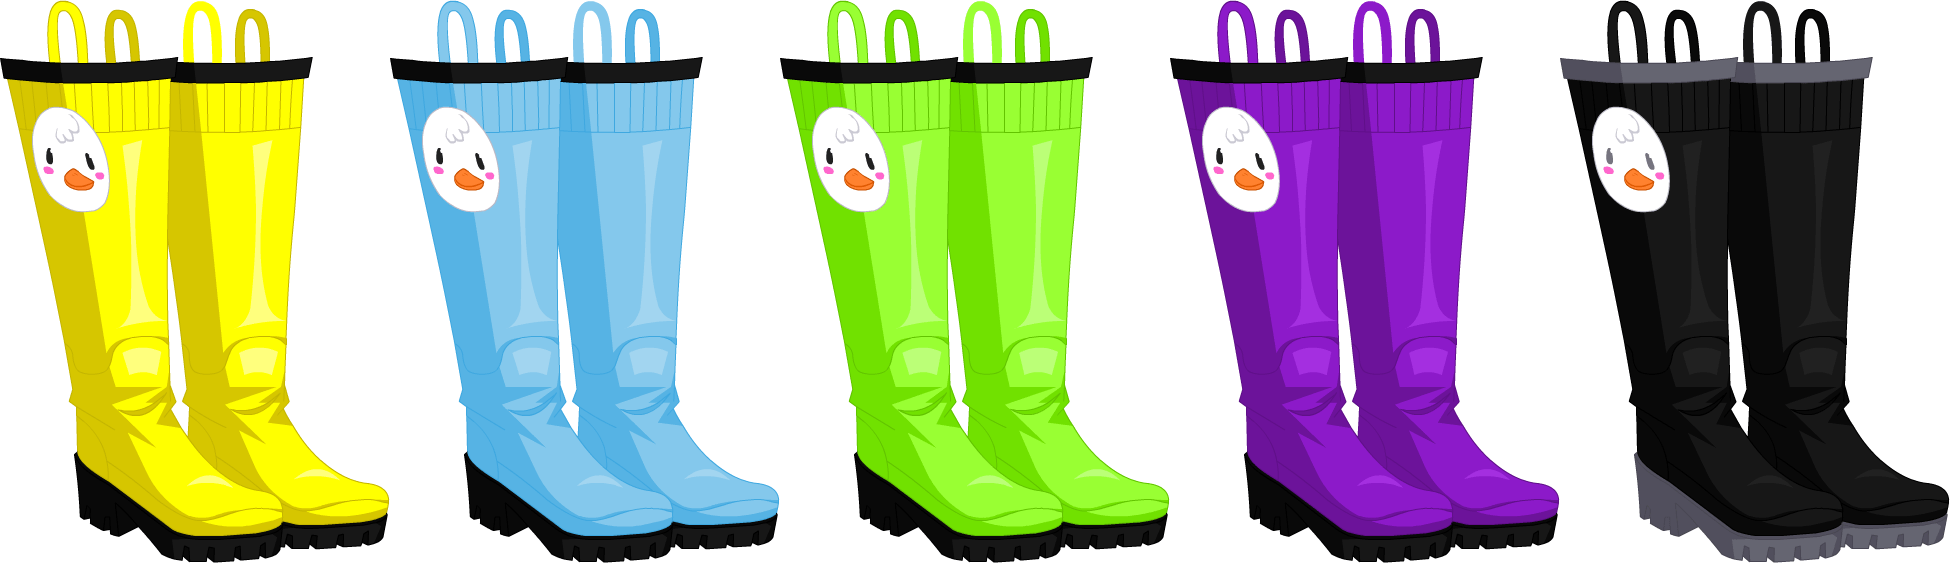 2016 Rainy Day Duckling Boots - Boots Uk (1950x563)